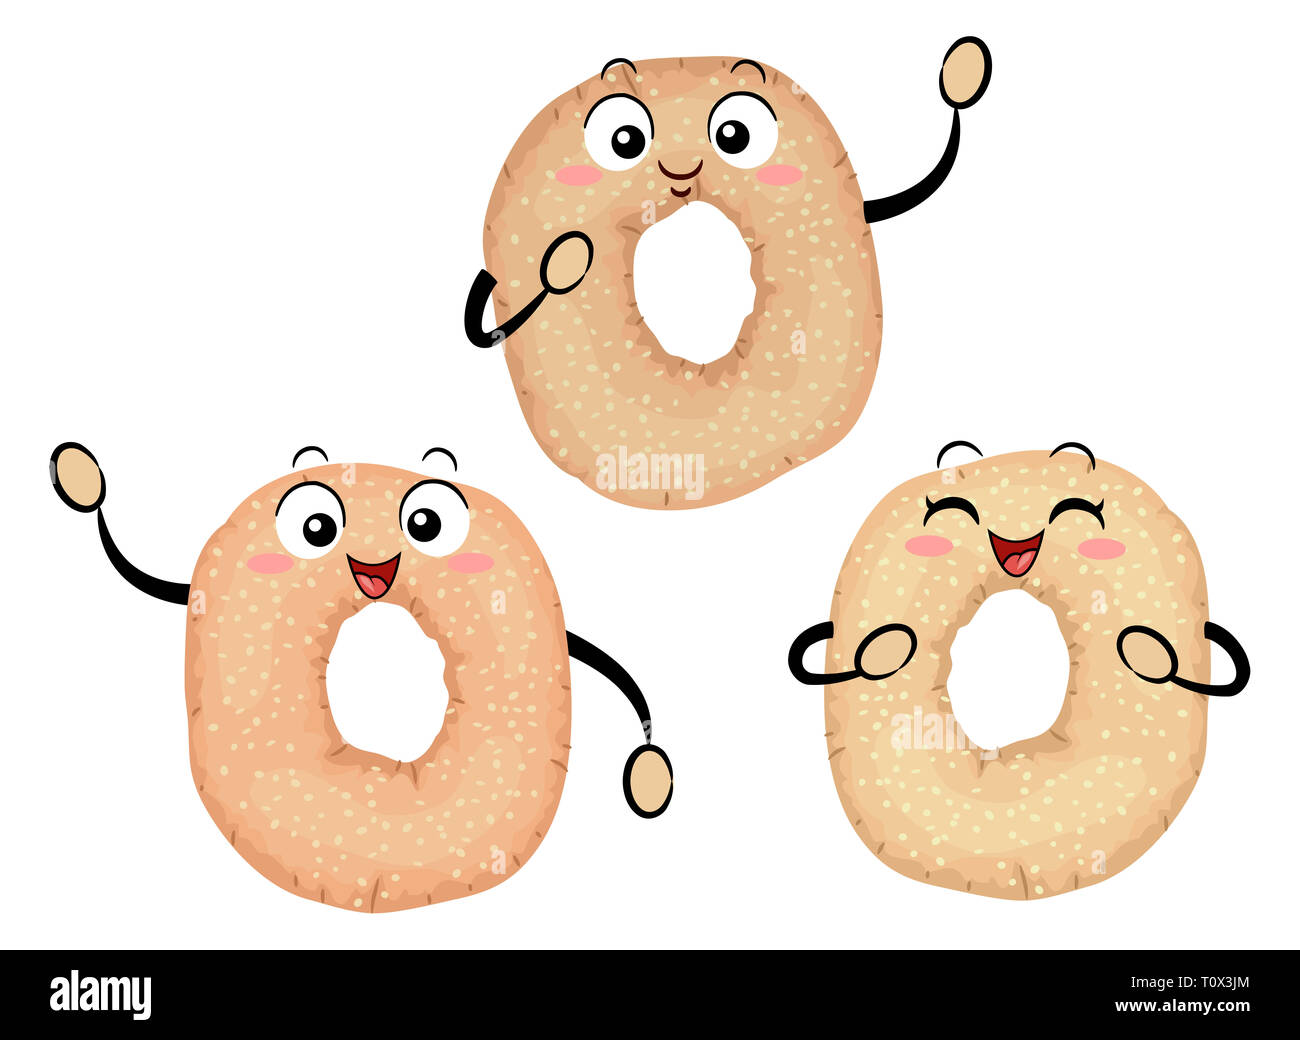 Illustration of Three Montreal Style Bagels Mascots Stock Photo